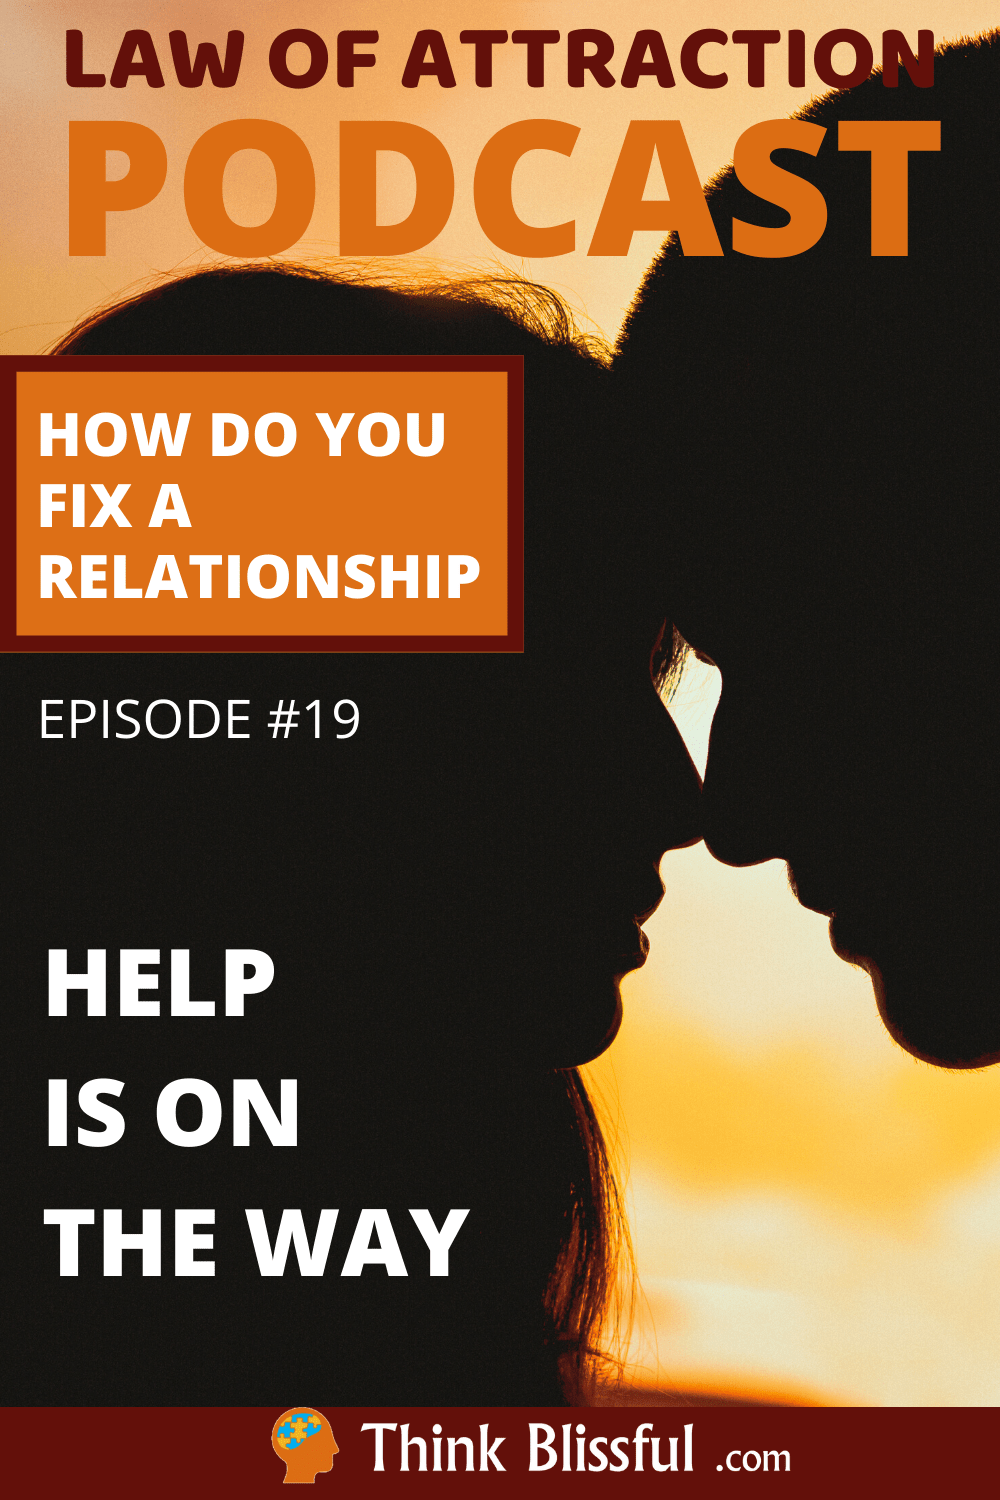 How do I fix a relationship with the law of attraction?